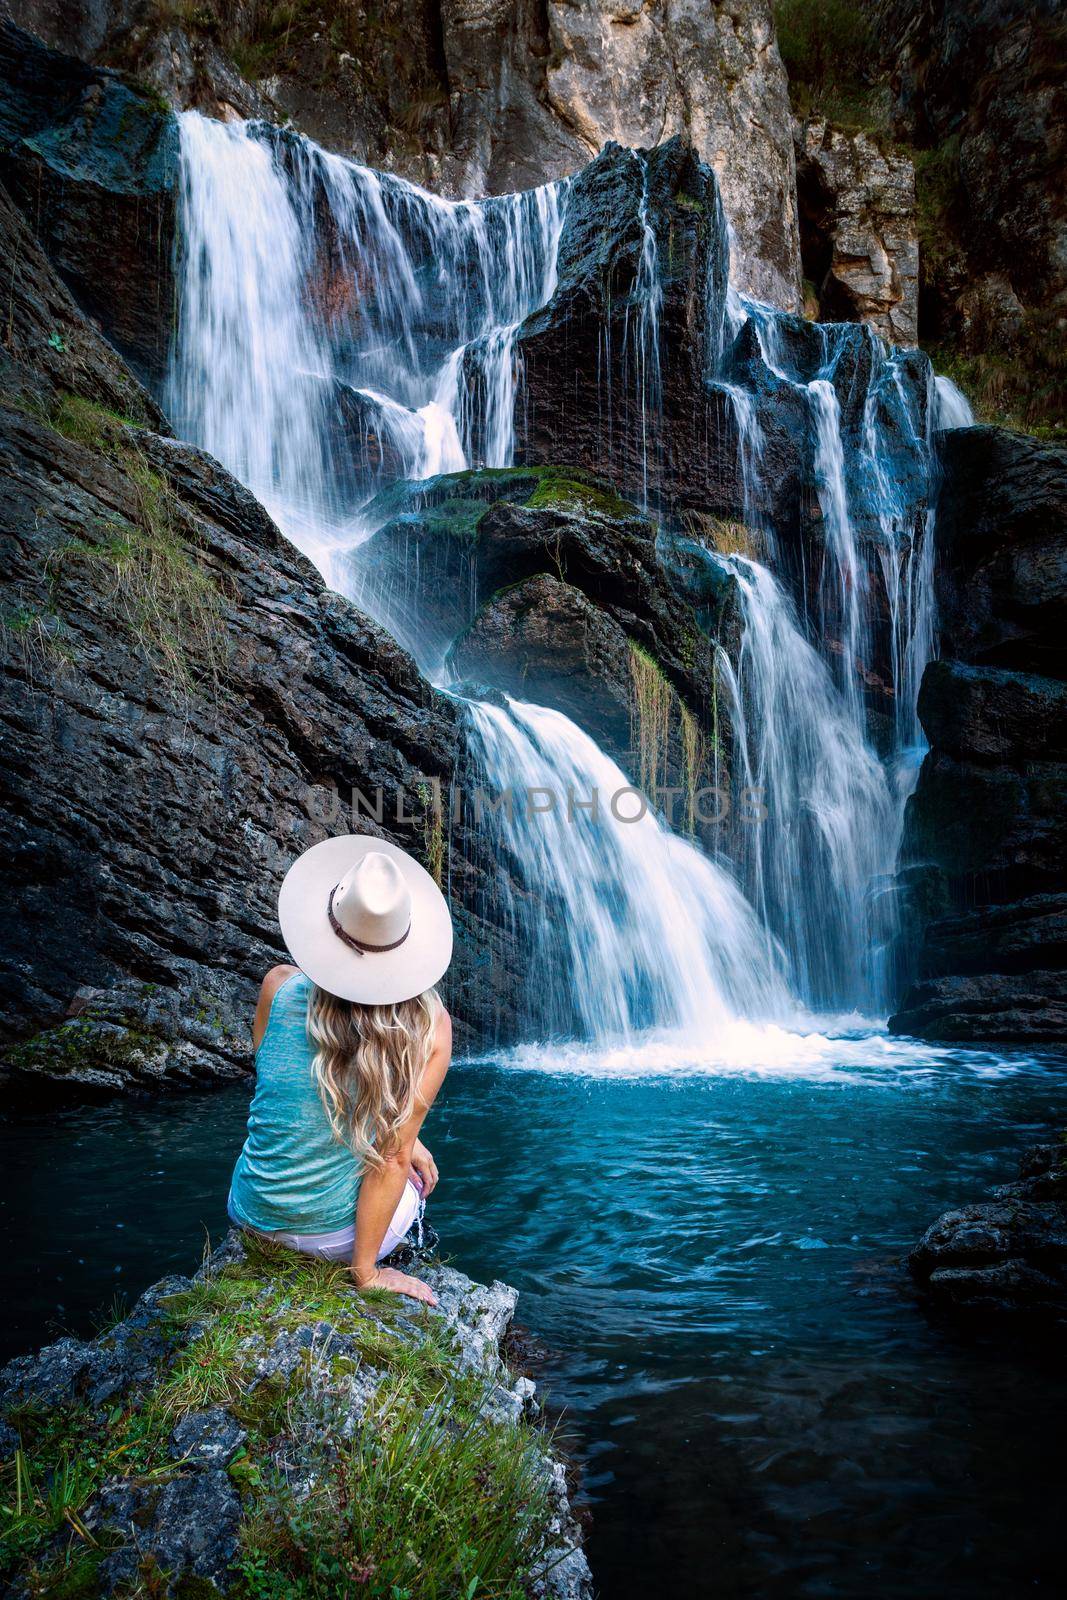 Female sitting by a tumbling waterfall and natural rock pool by lovleah